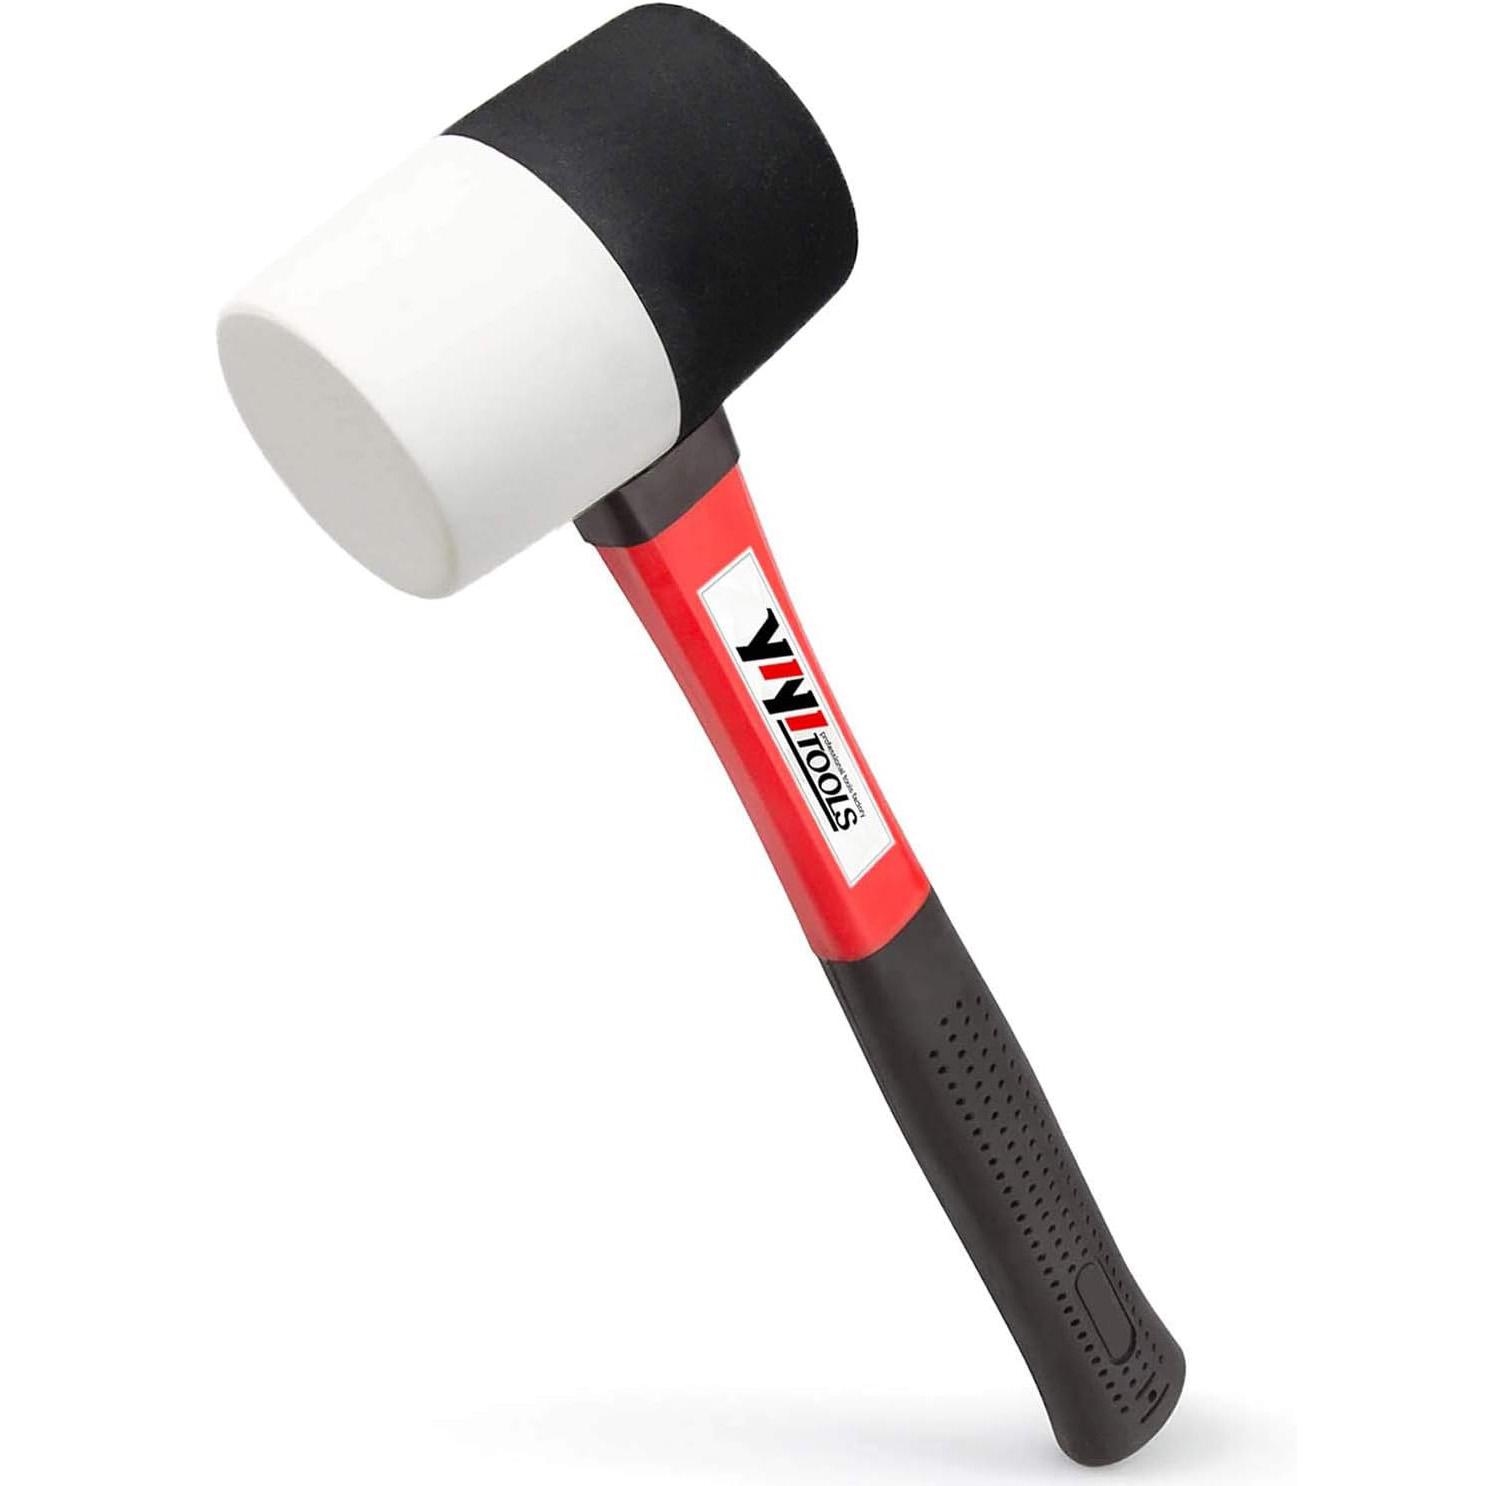 Rubber Mallet with Fiberglass Handle for $5.16